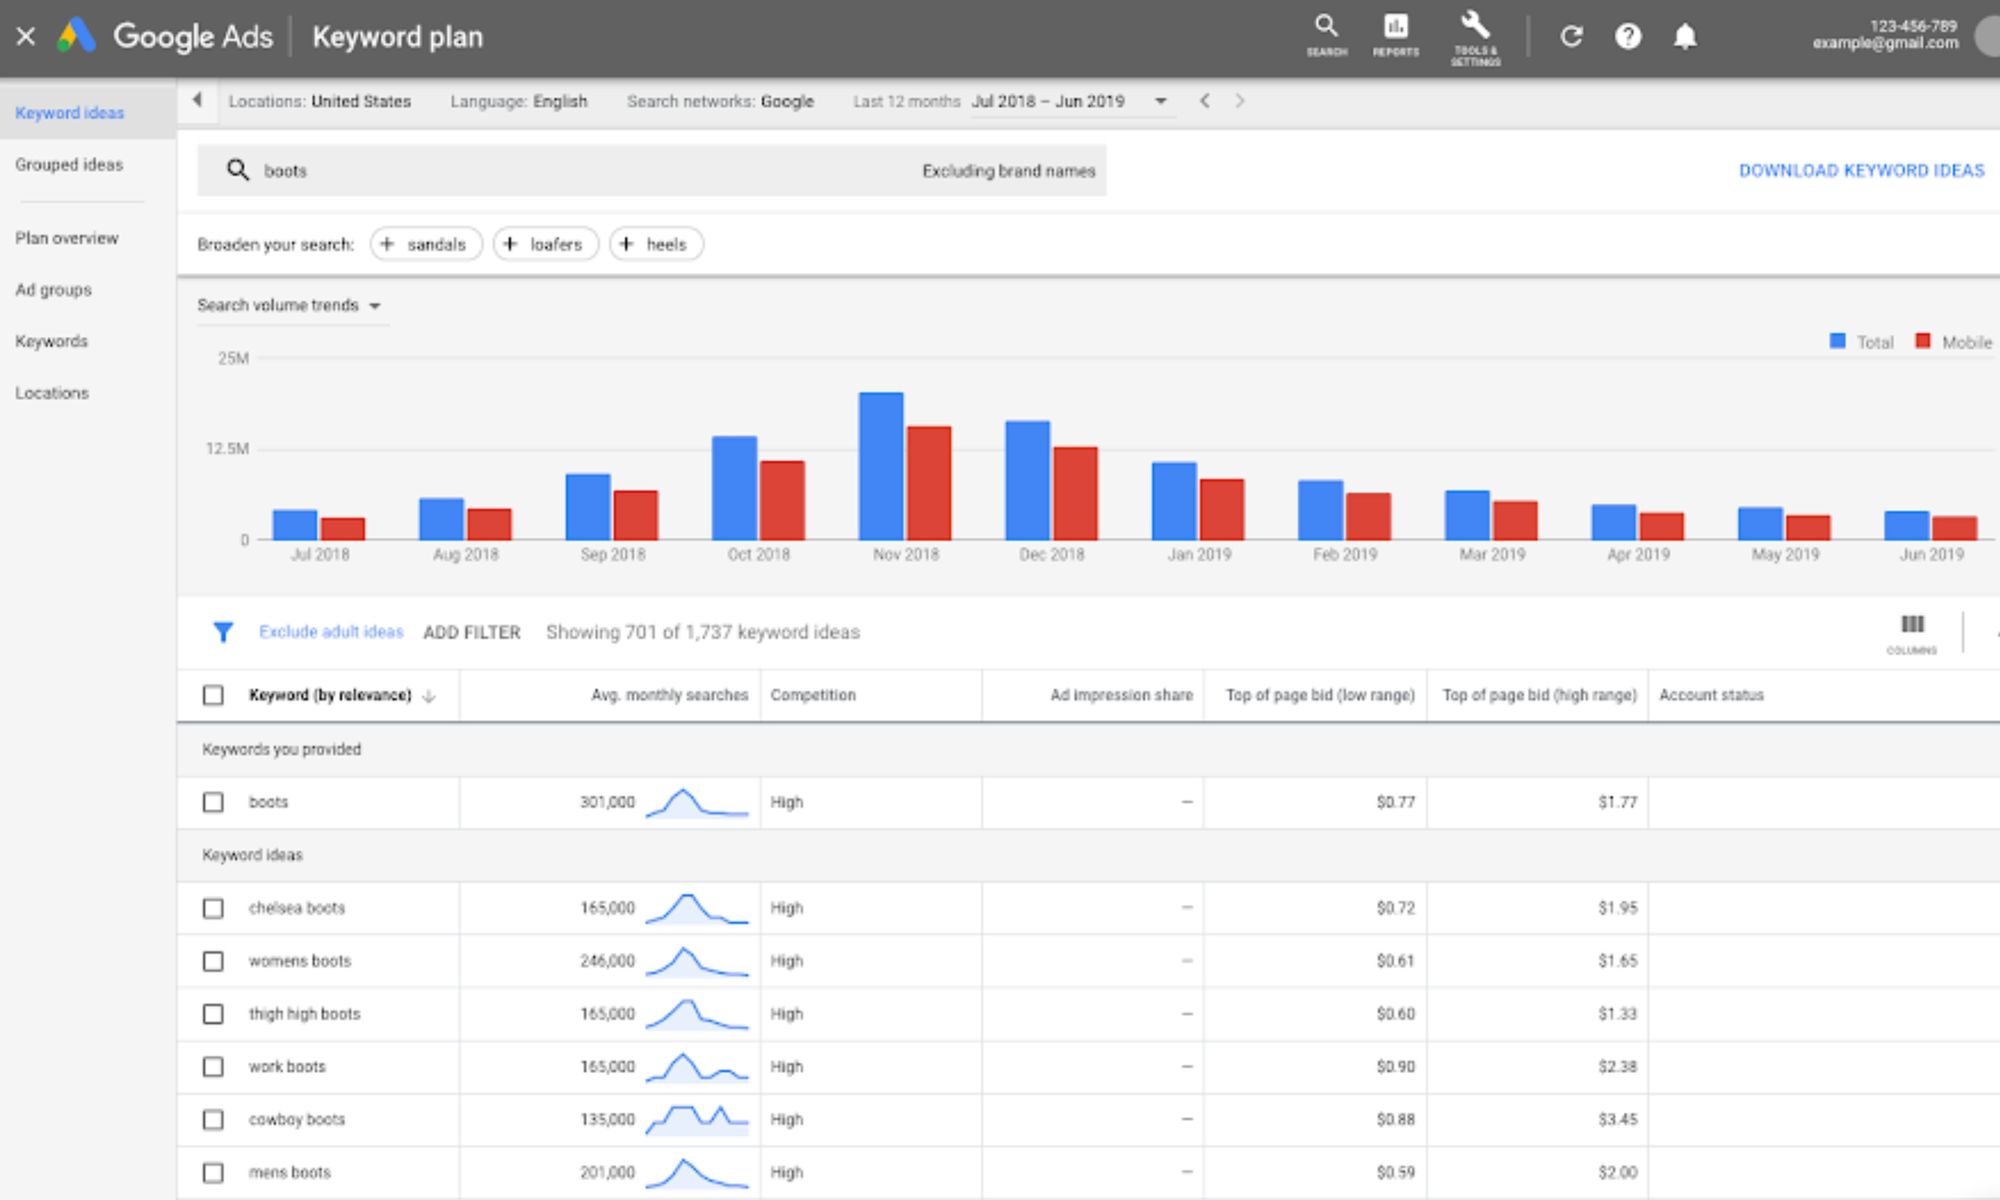 Google introduces website filtering and brand exclusions on Keyword Planner